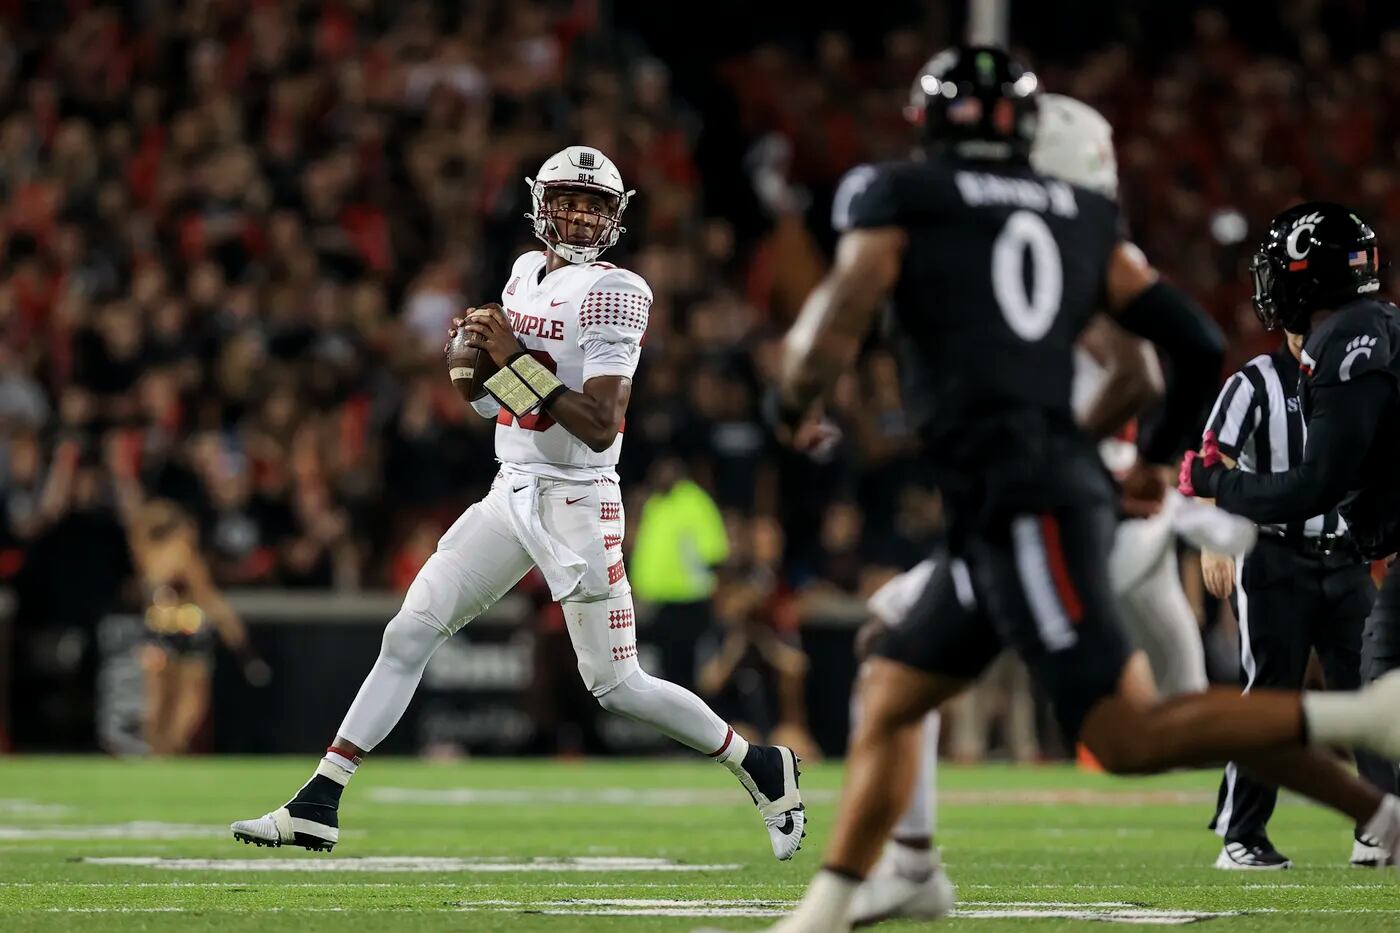 Utes know a lot can happen in final weeks of regular season to set